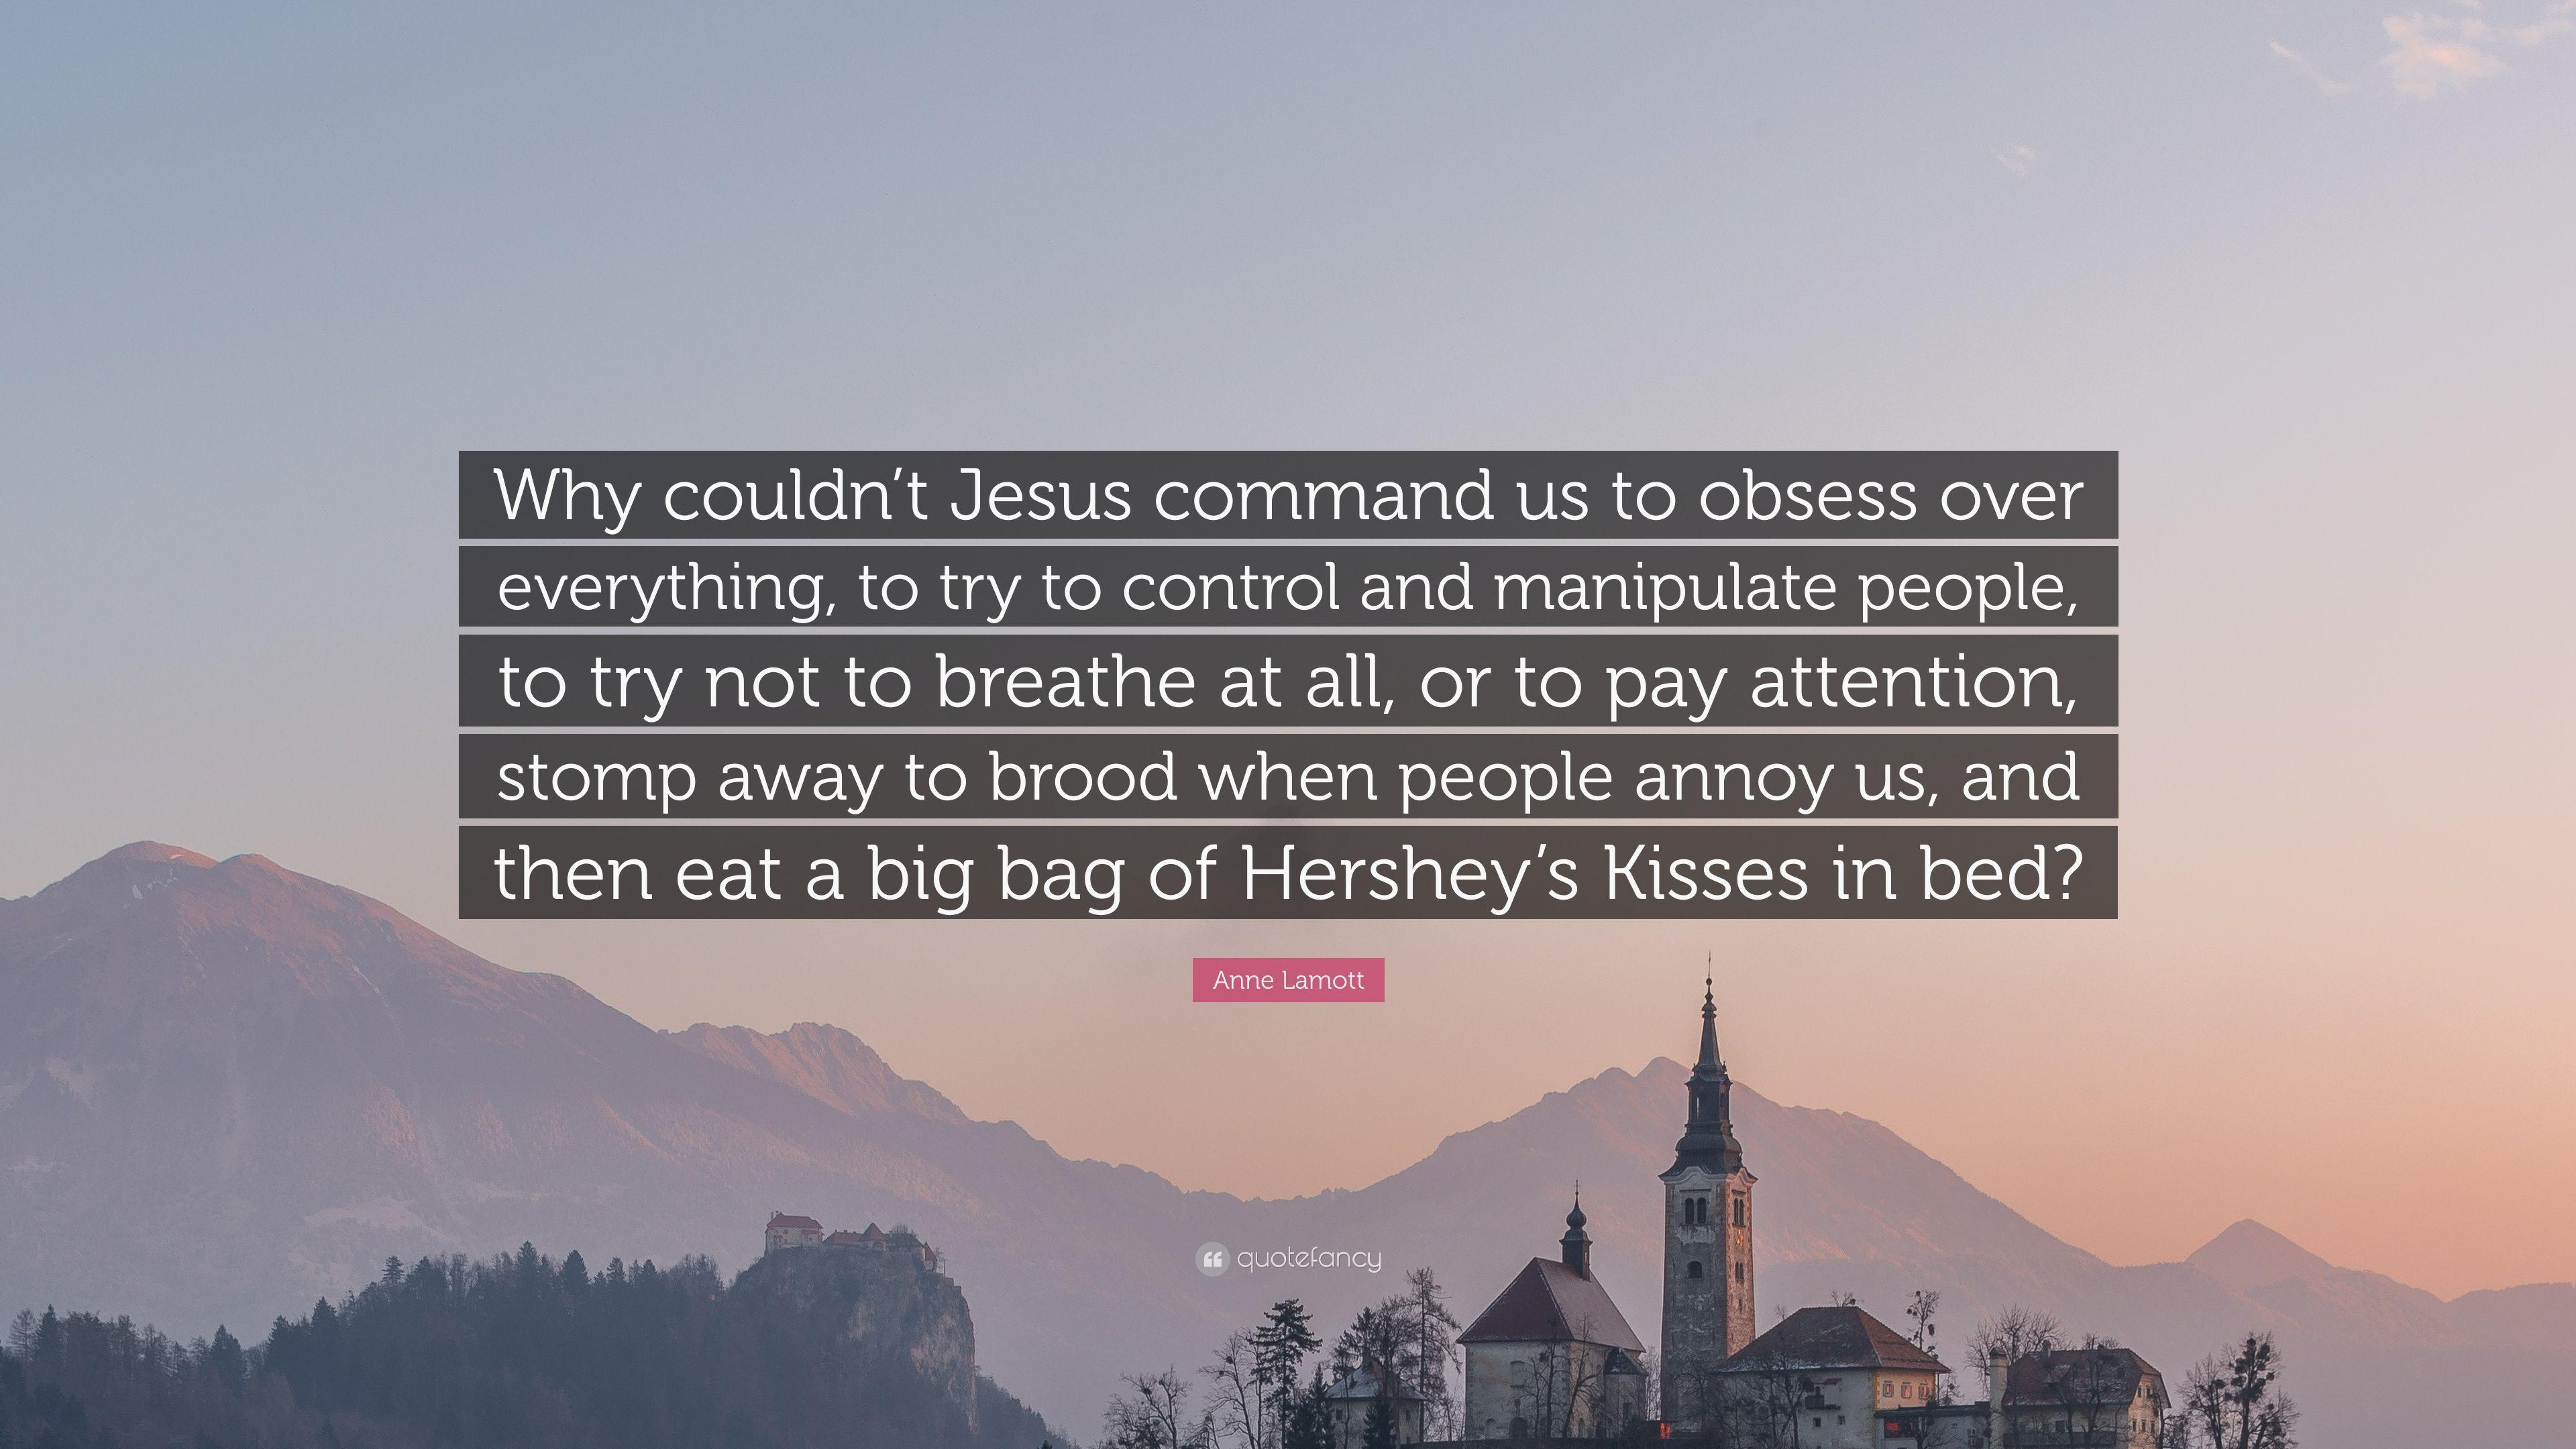 Anne Lamott Quote: “Why couldn't Jesus command us to obsess over